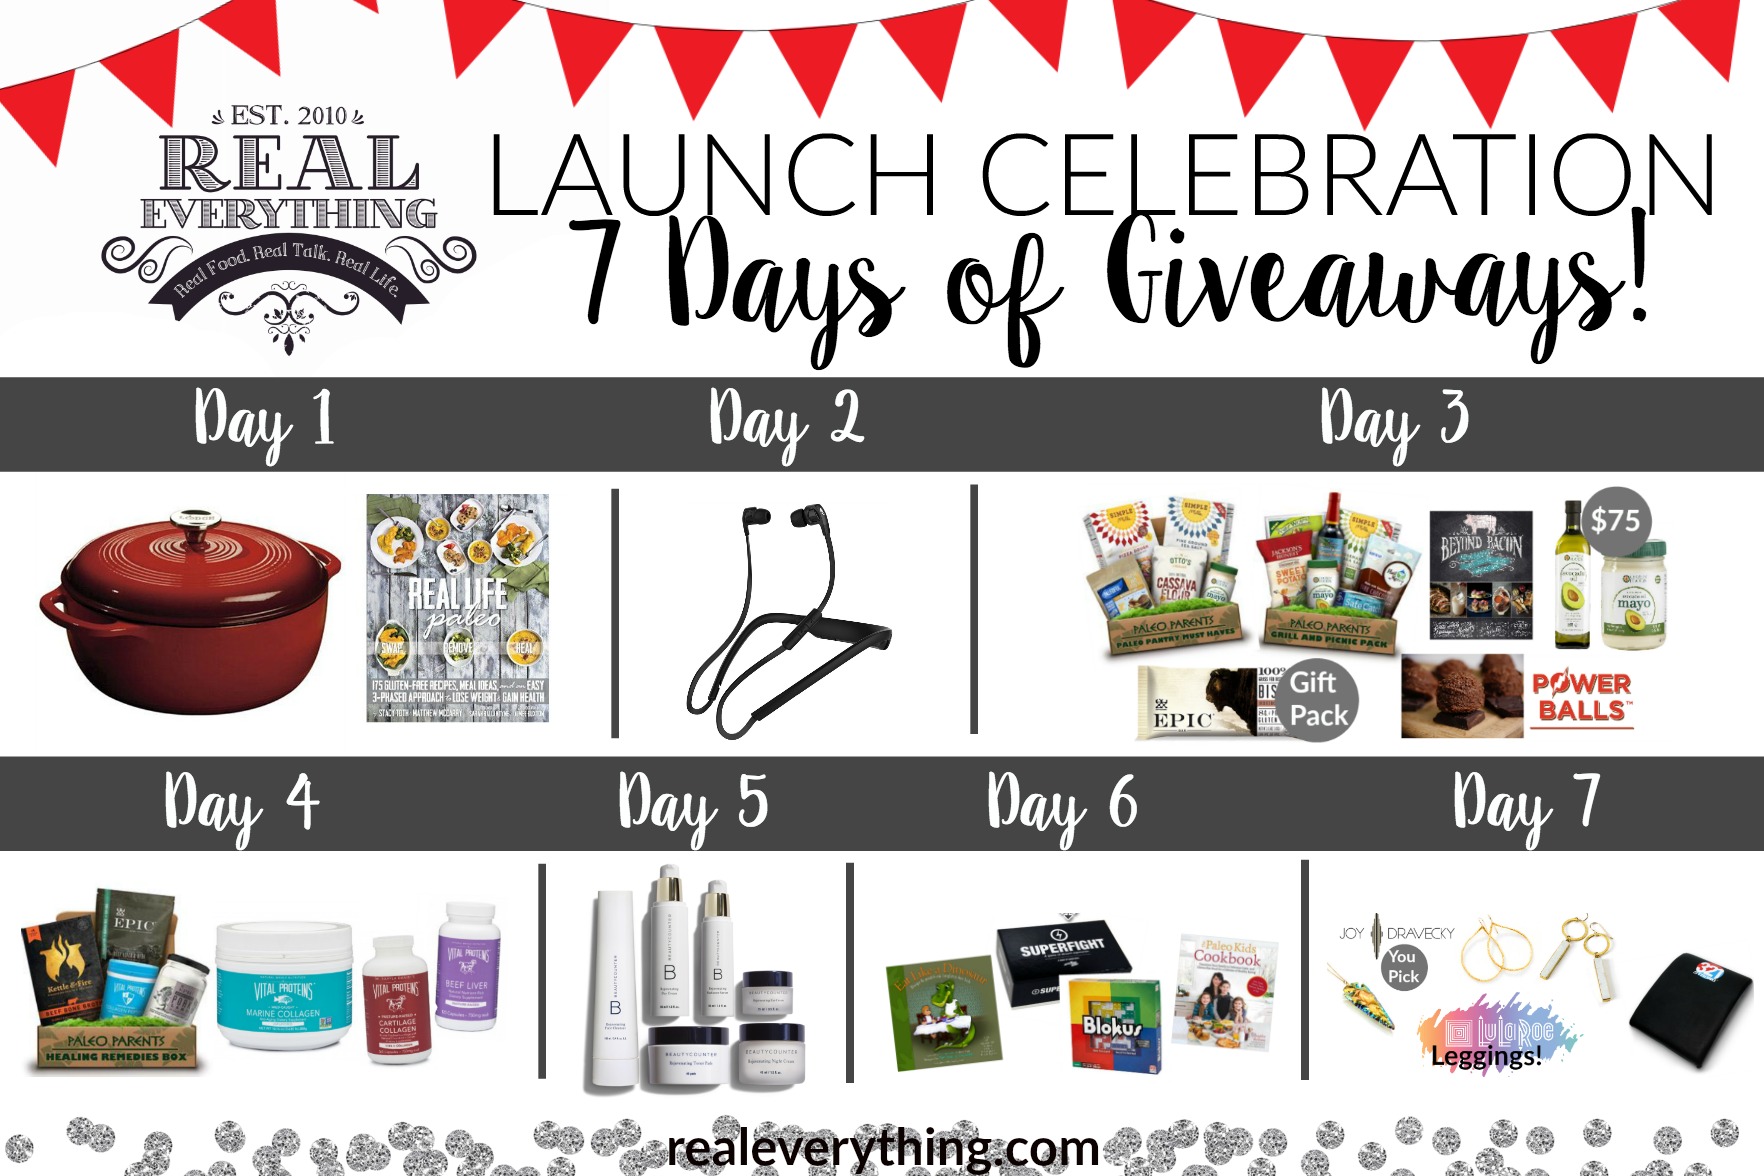 re-real-everything-7-days-giveaways-final